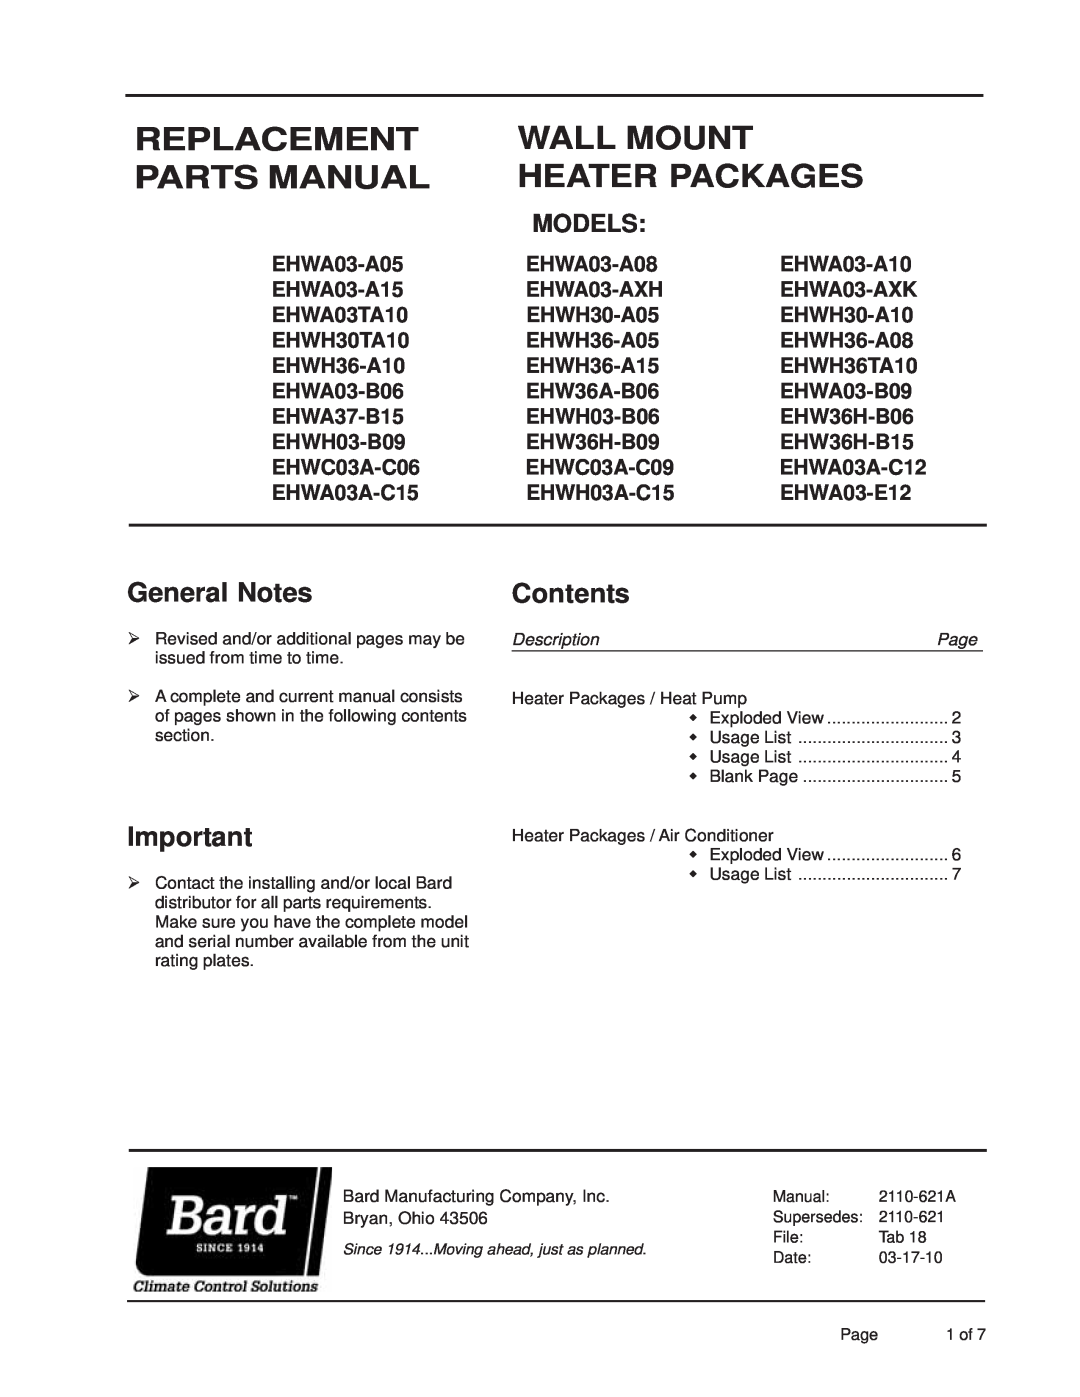 Bard EHWH36-A05, EHWH36-A15 manual Replacement, Wall Mount, Parts Manual, Heater Packages, General Notes, Contents, Models 